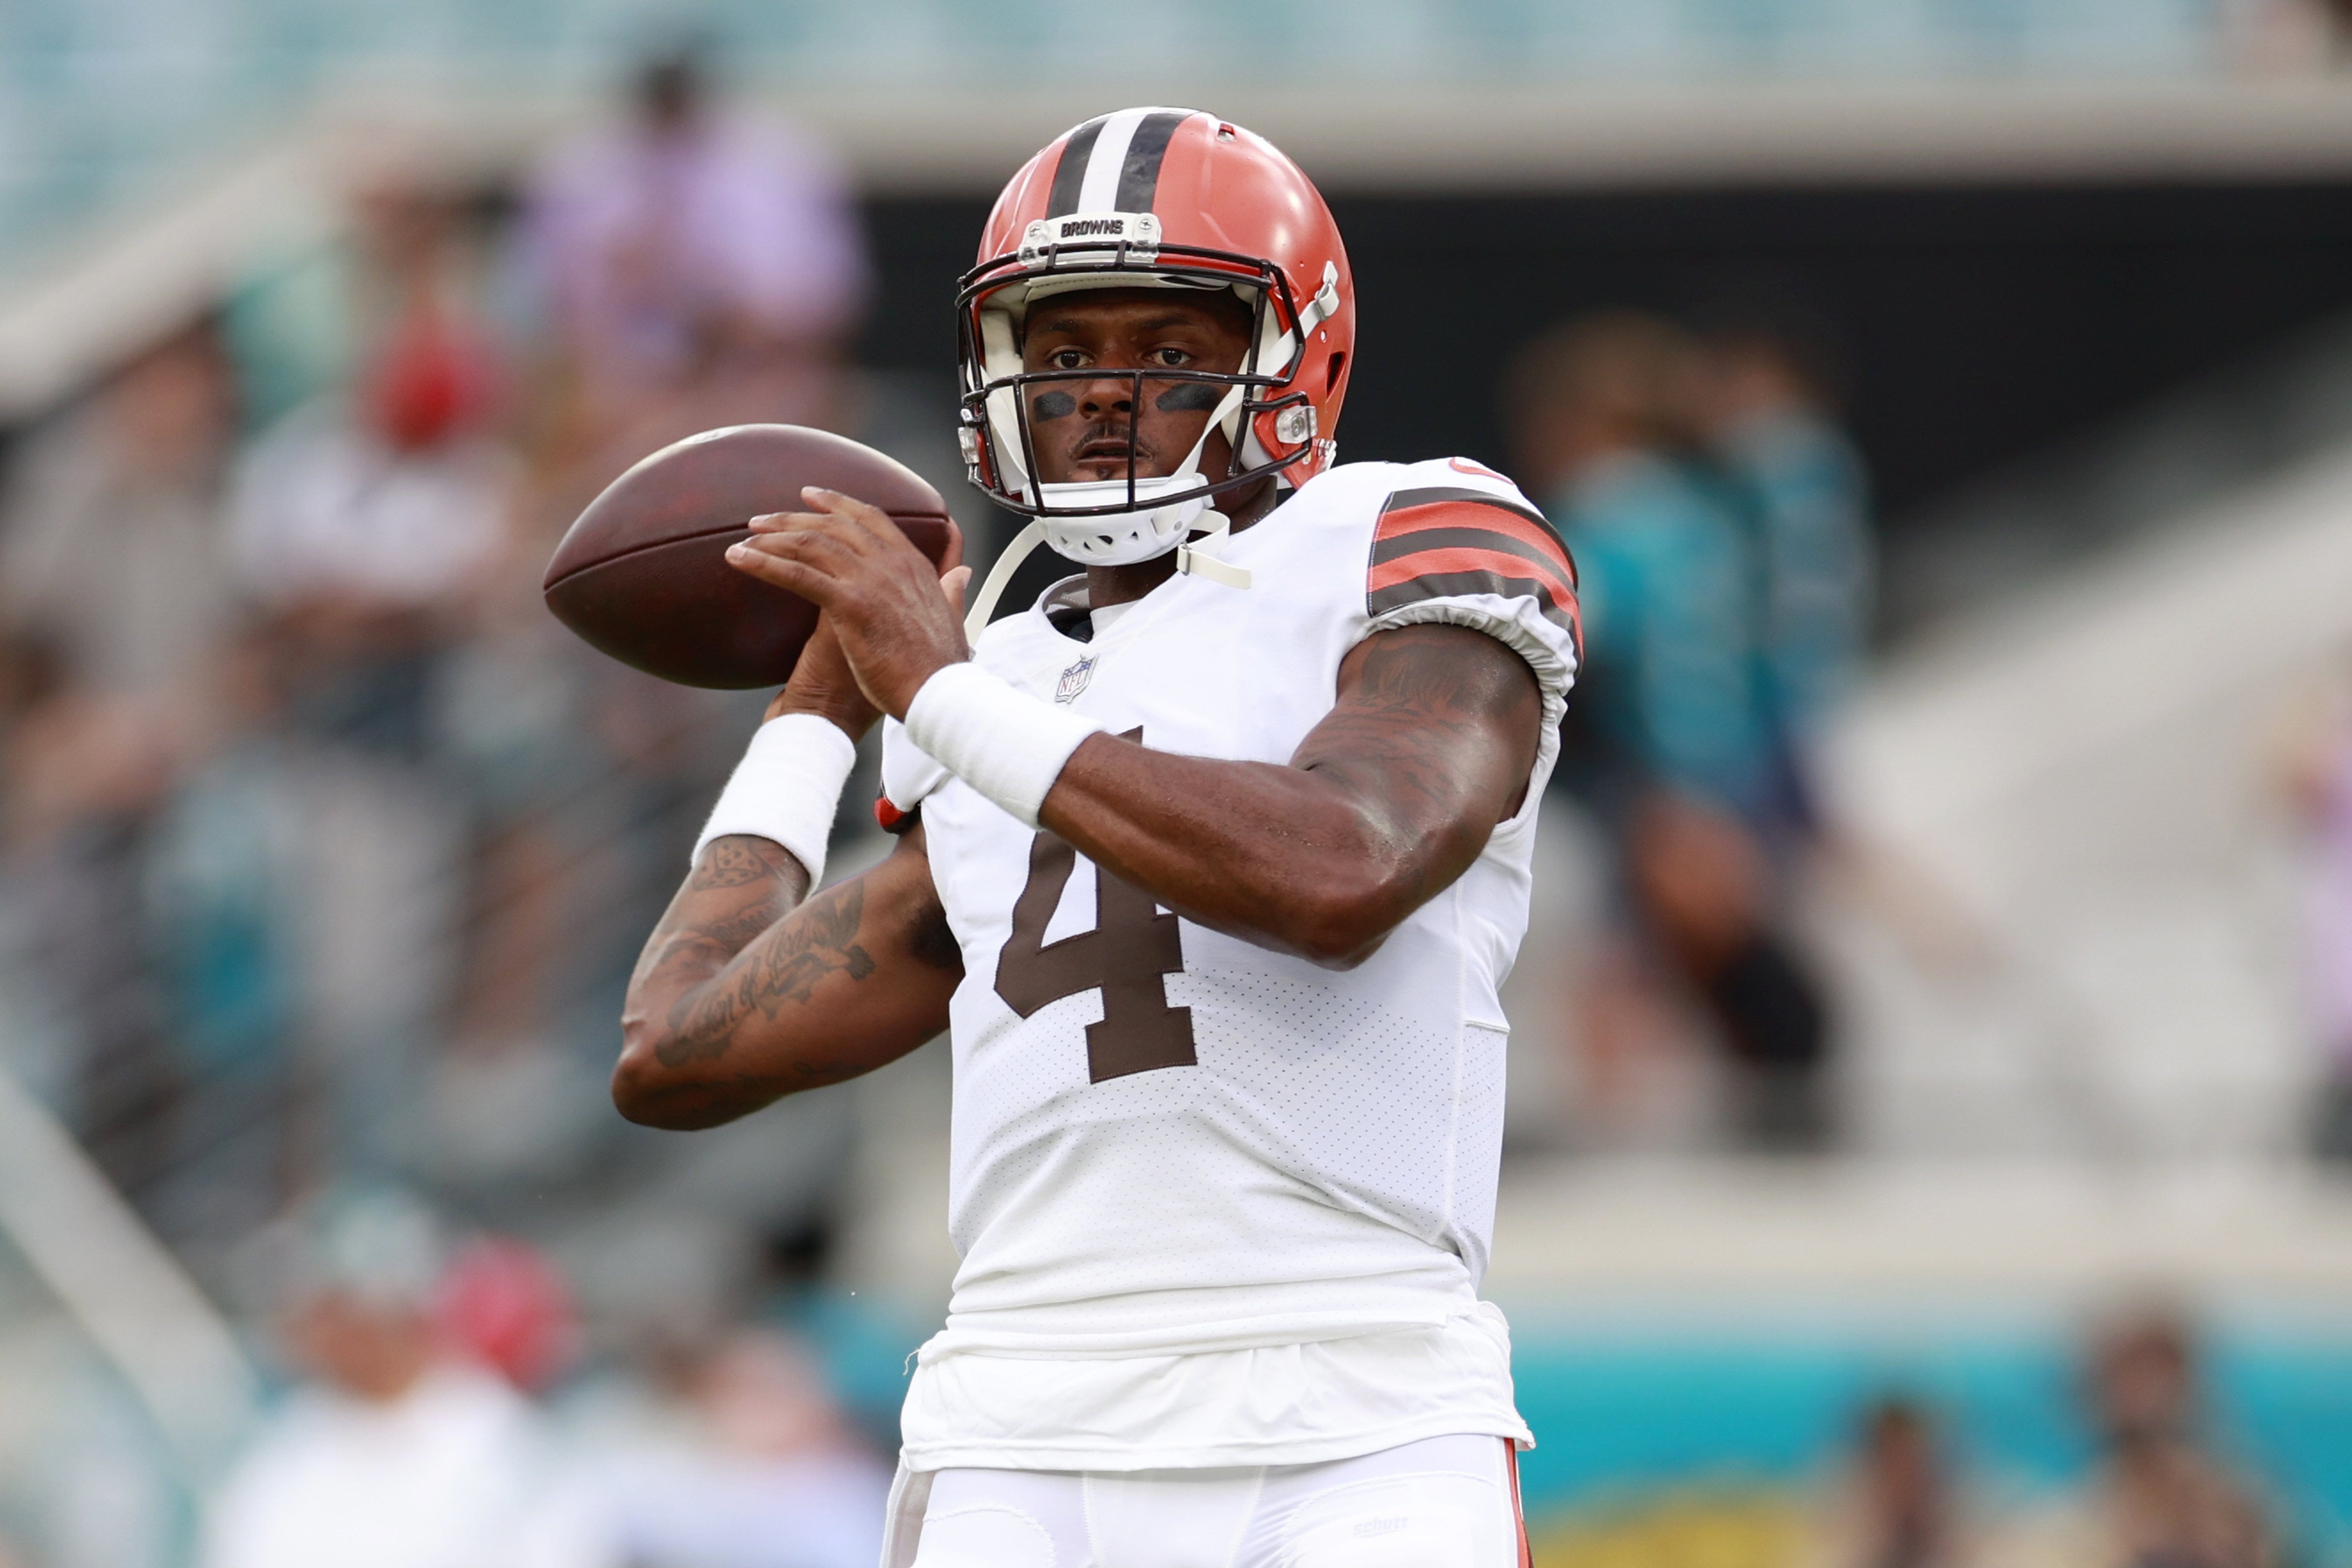 Jimmy and Dee Haslam, Browns owners, hurt women with their support of Deshaun Watson | Opinion